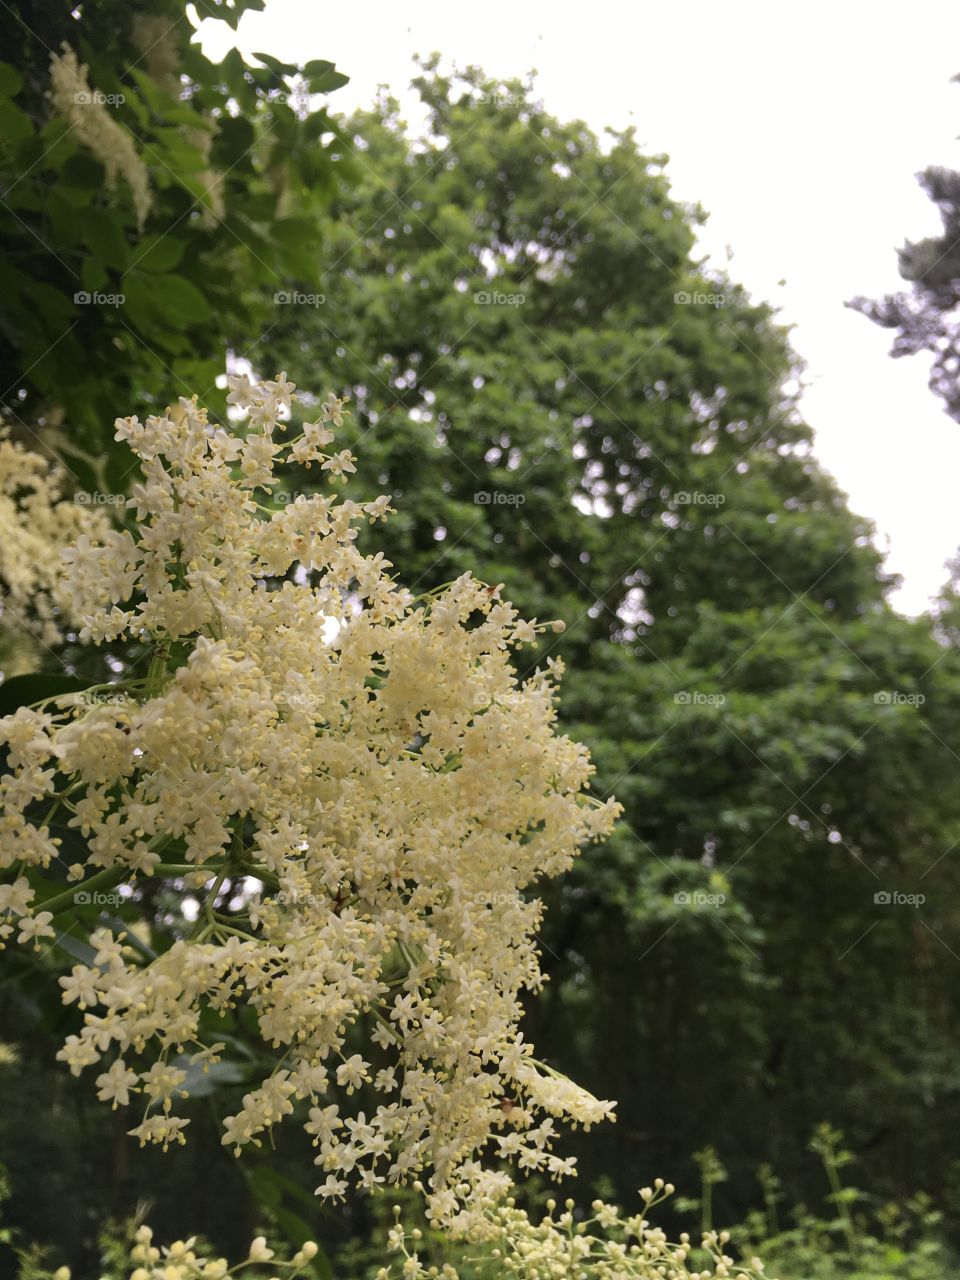 Close up view of Elderflower flowerhead with silver birch and pine trees in the background 